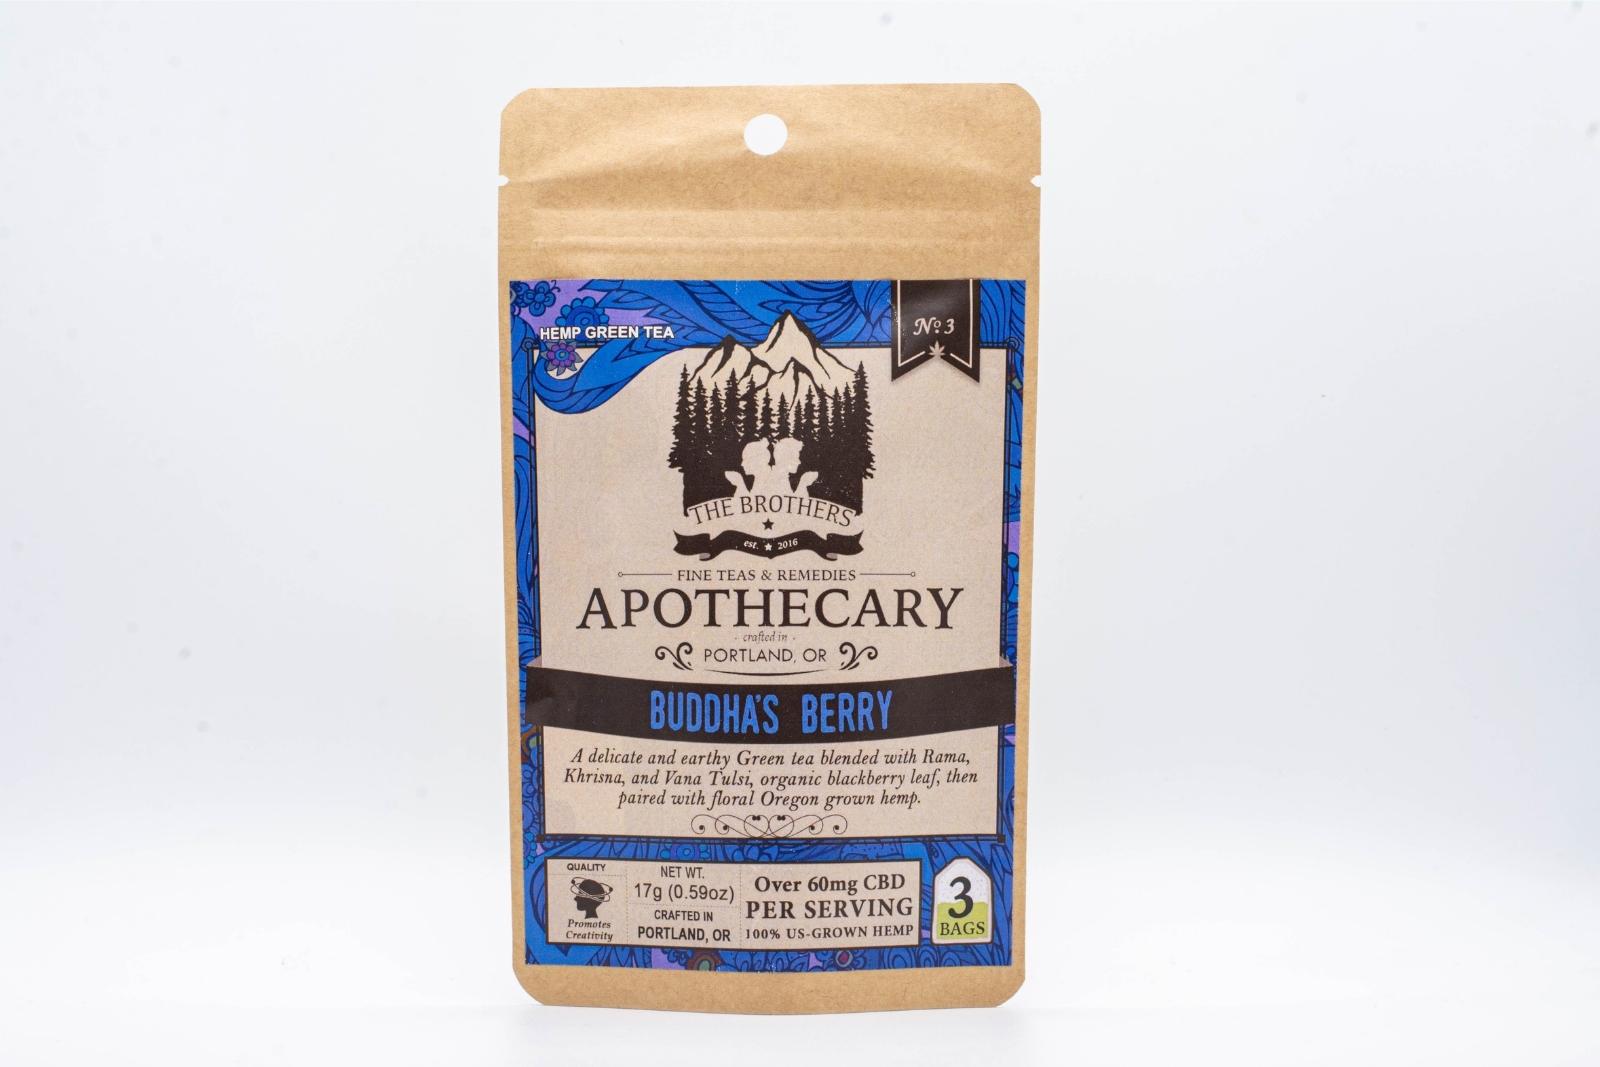 A large packet of The Brothers Apothecary's Buddha's Berry Tea on a white background